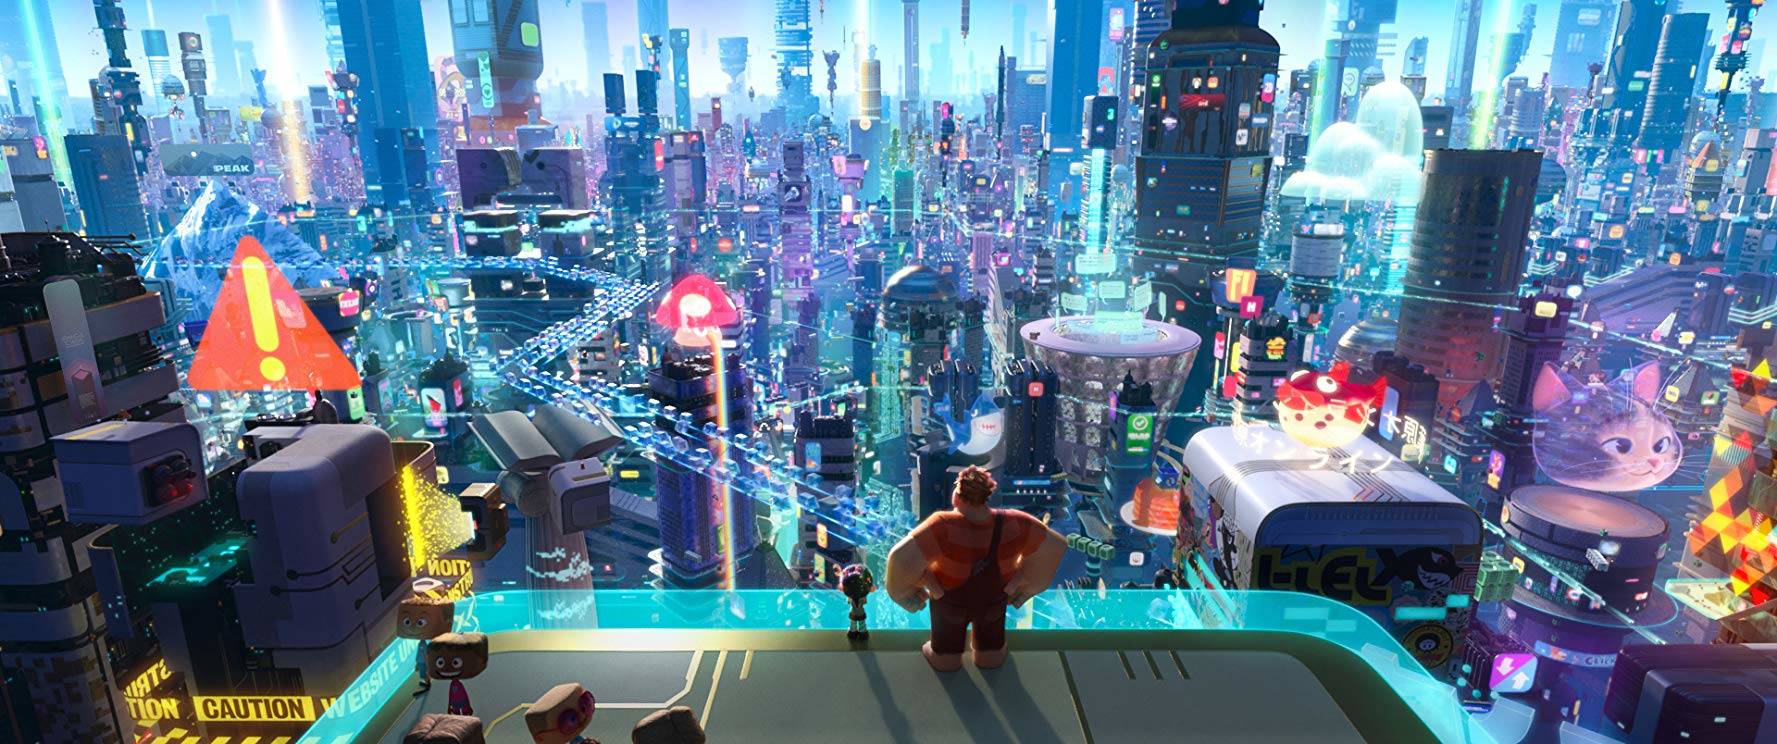 ‘Ralph Breaks the Internet’ — an inventive sequel that brings something new to the table